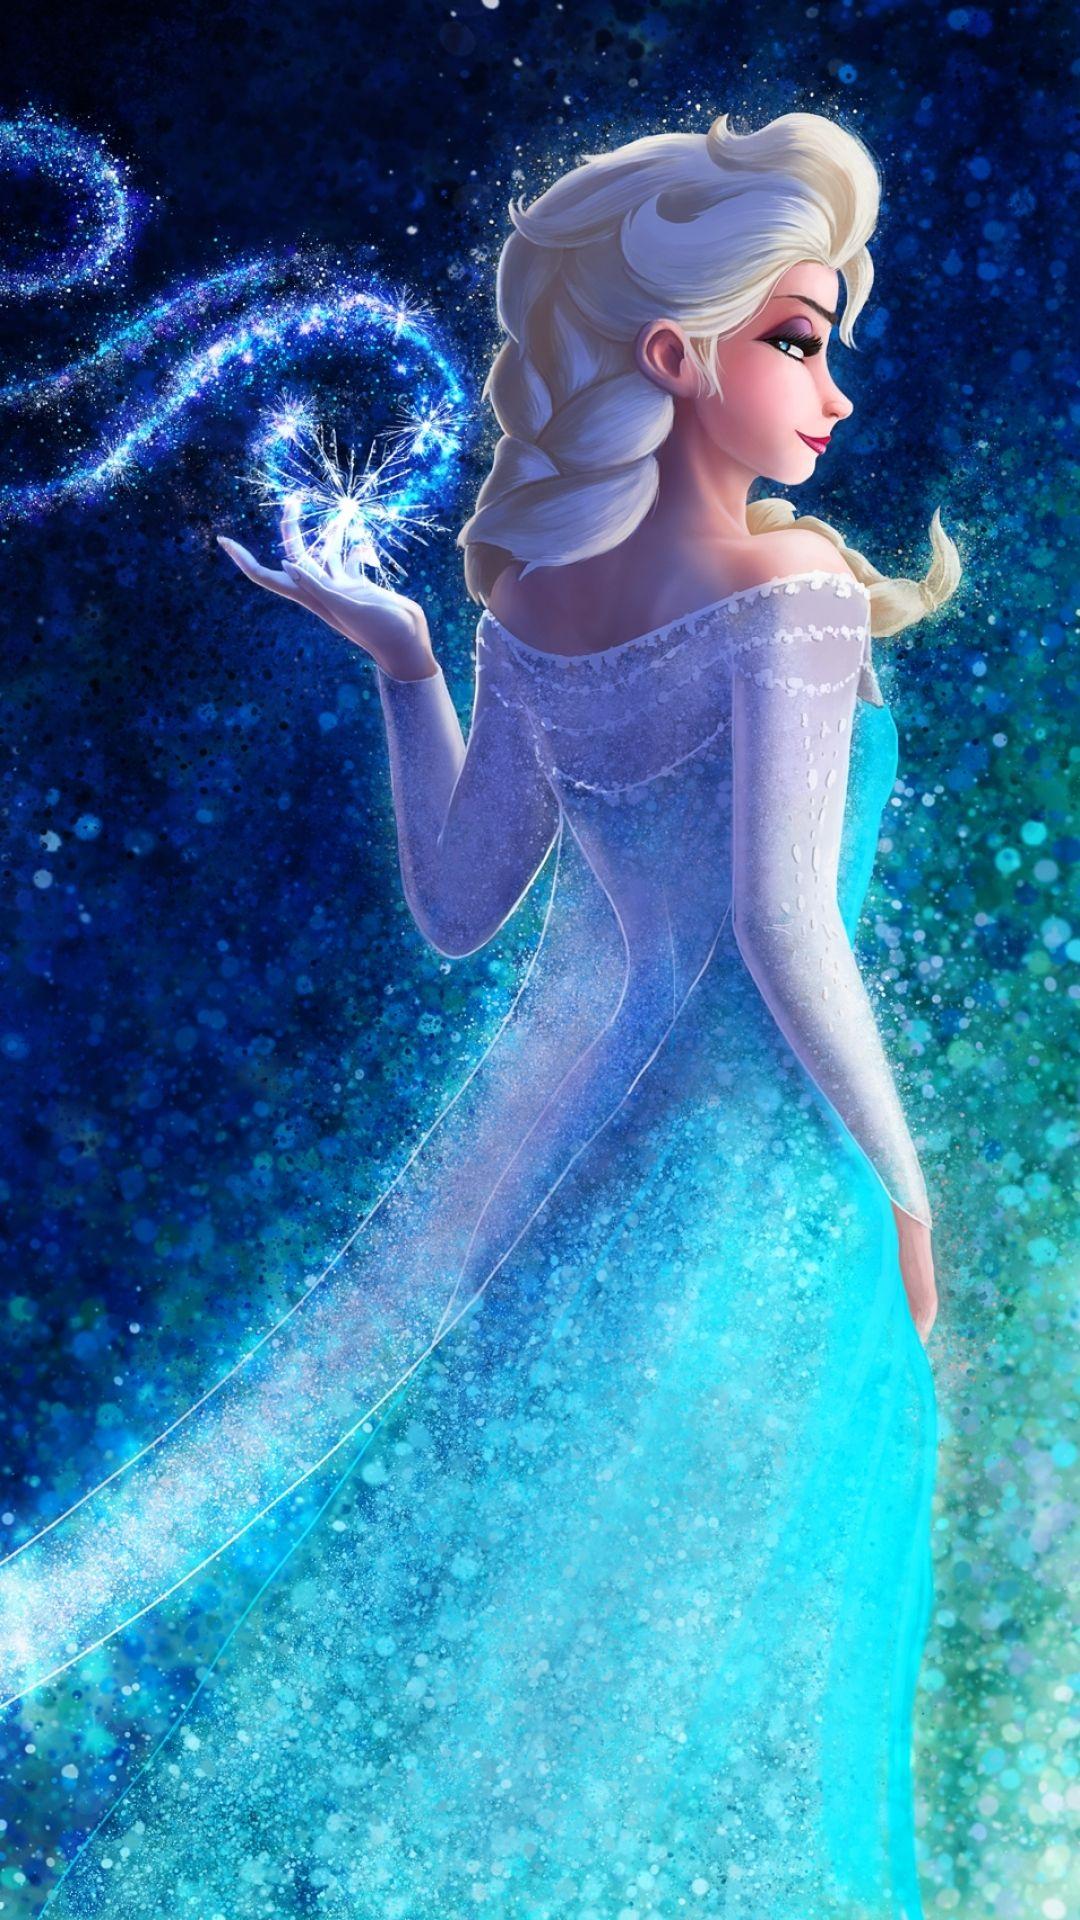 Frozen For Mobile Wallpapers - Wallpaper Cave